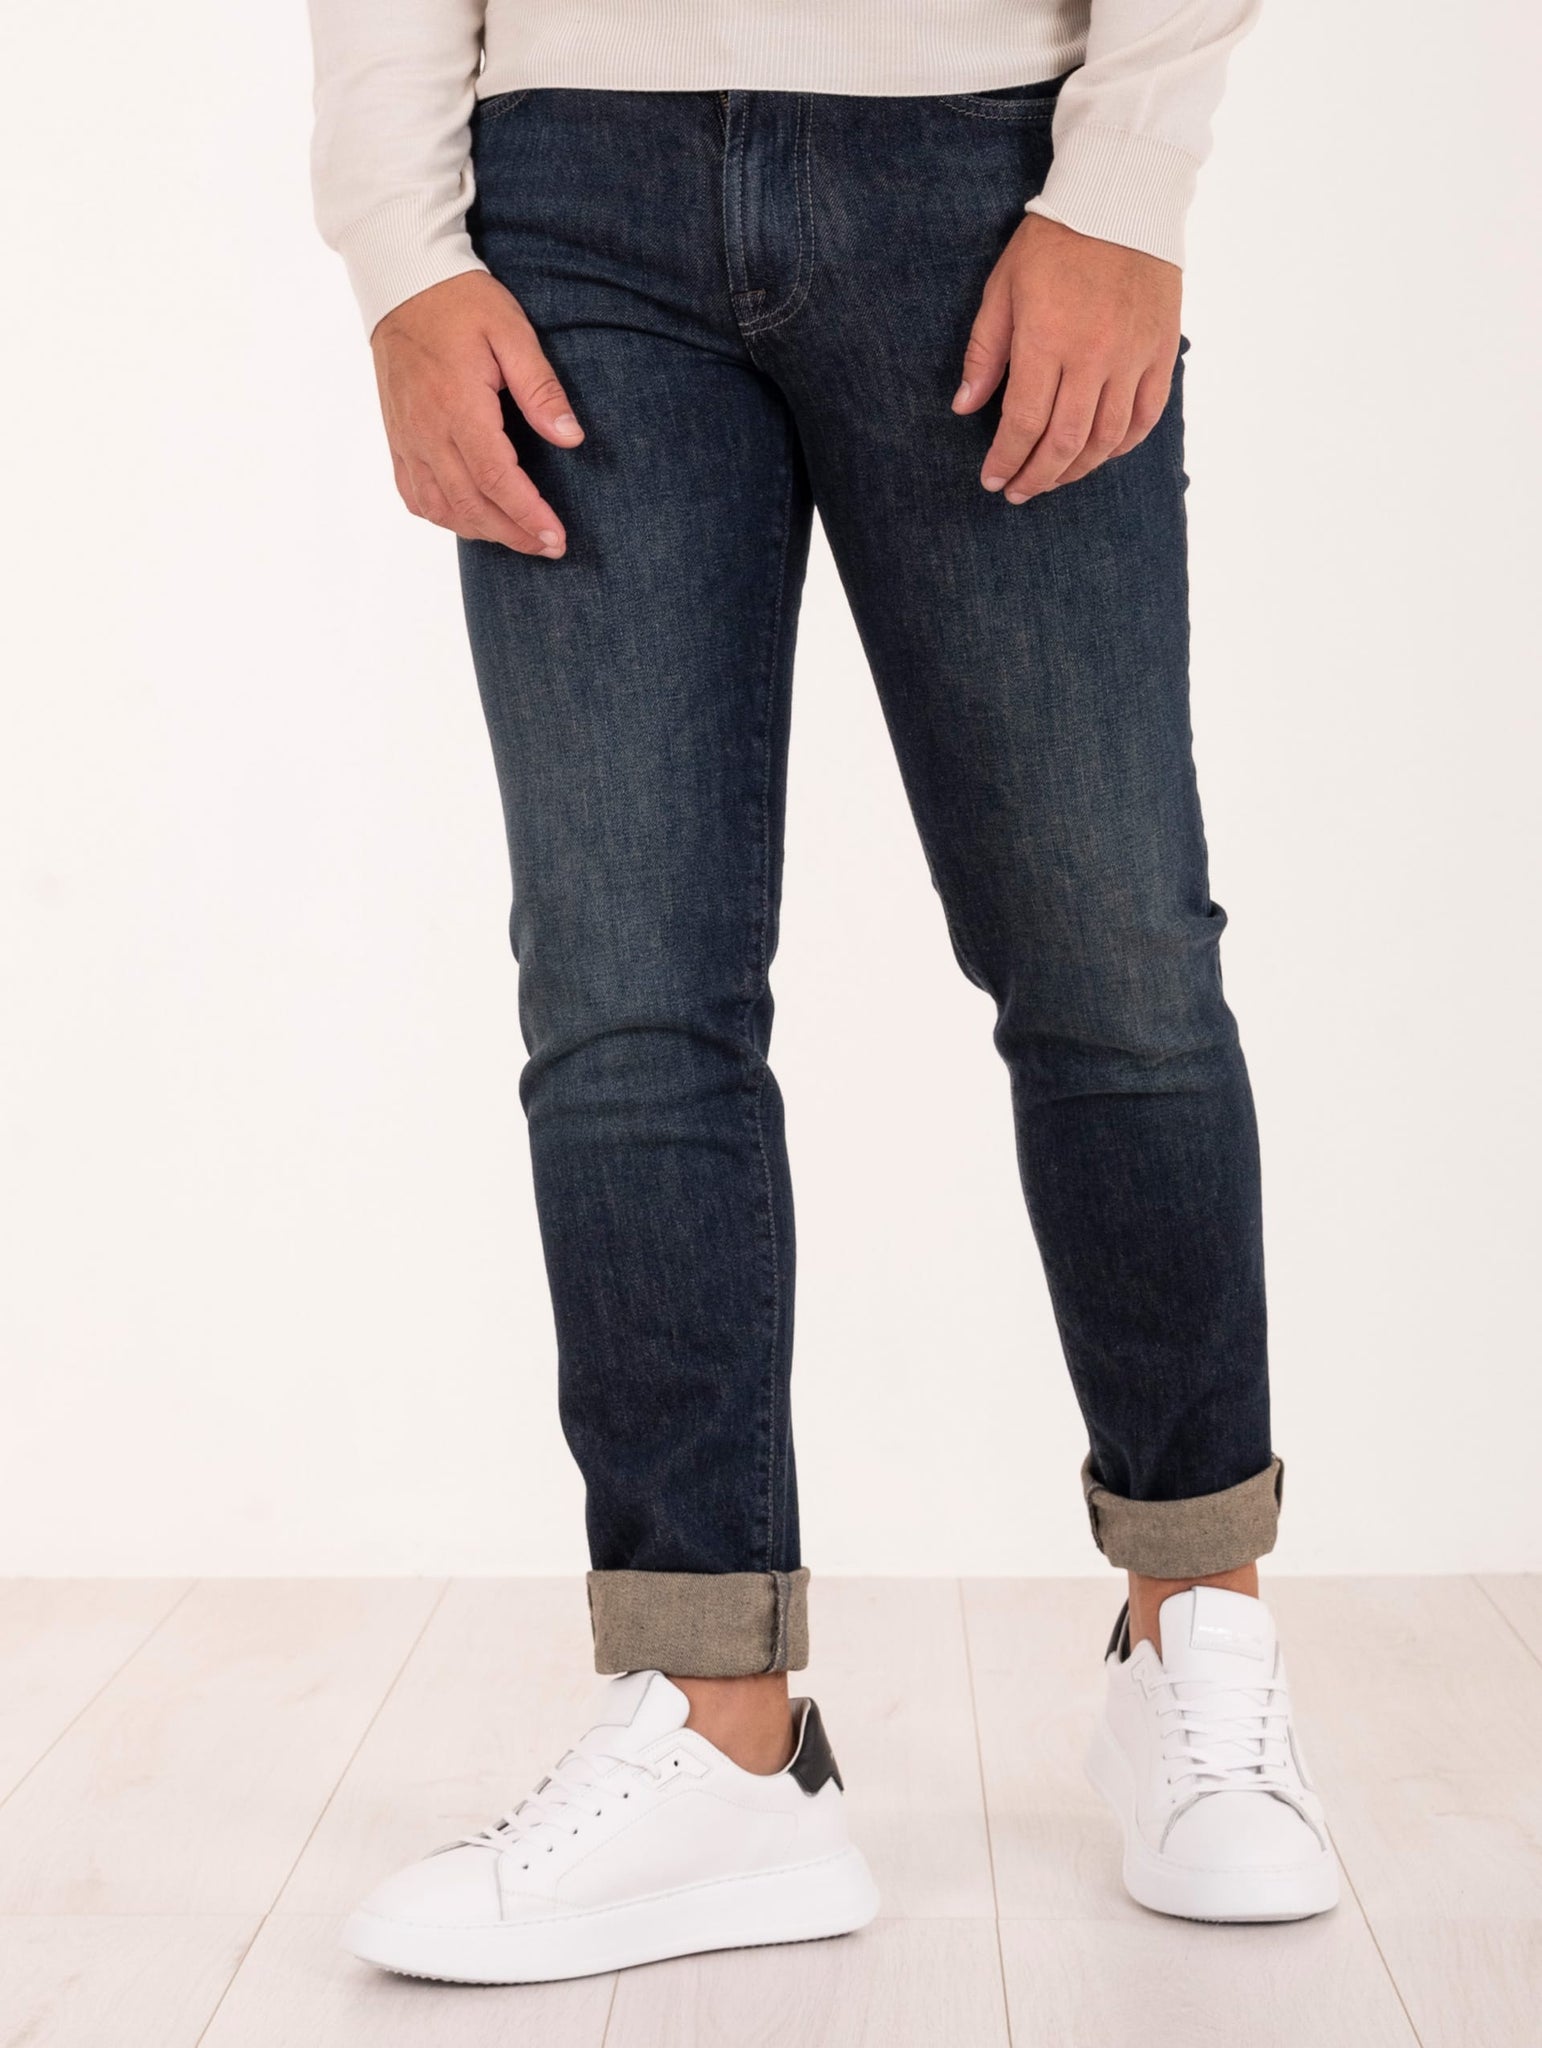 Jeans Roy Roger's Special Deep Blue in Denim Scuro